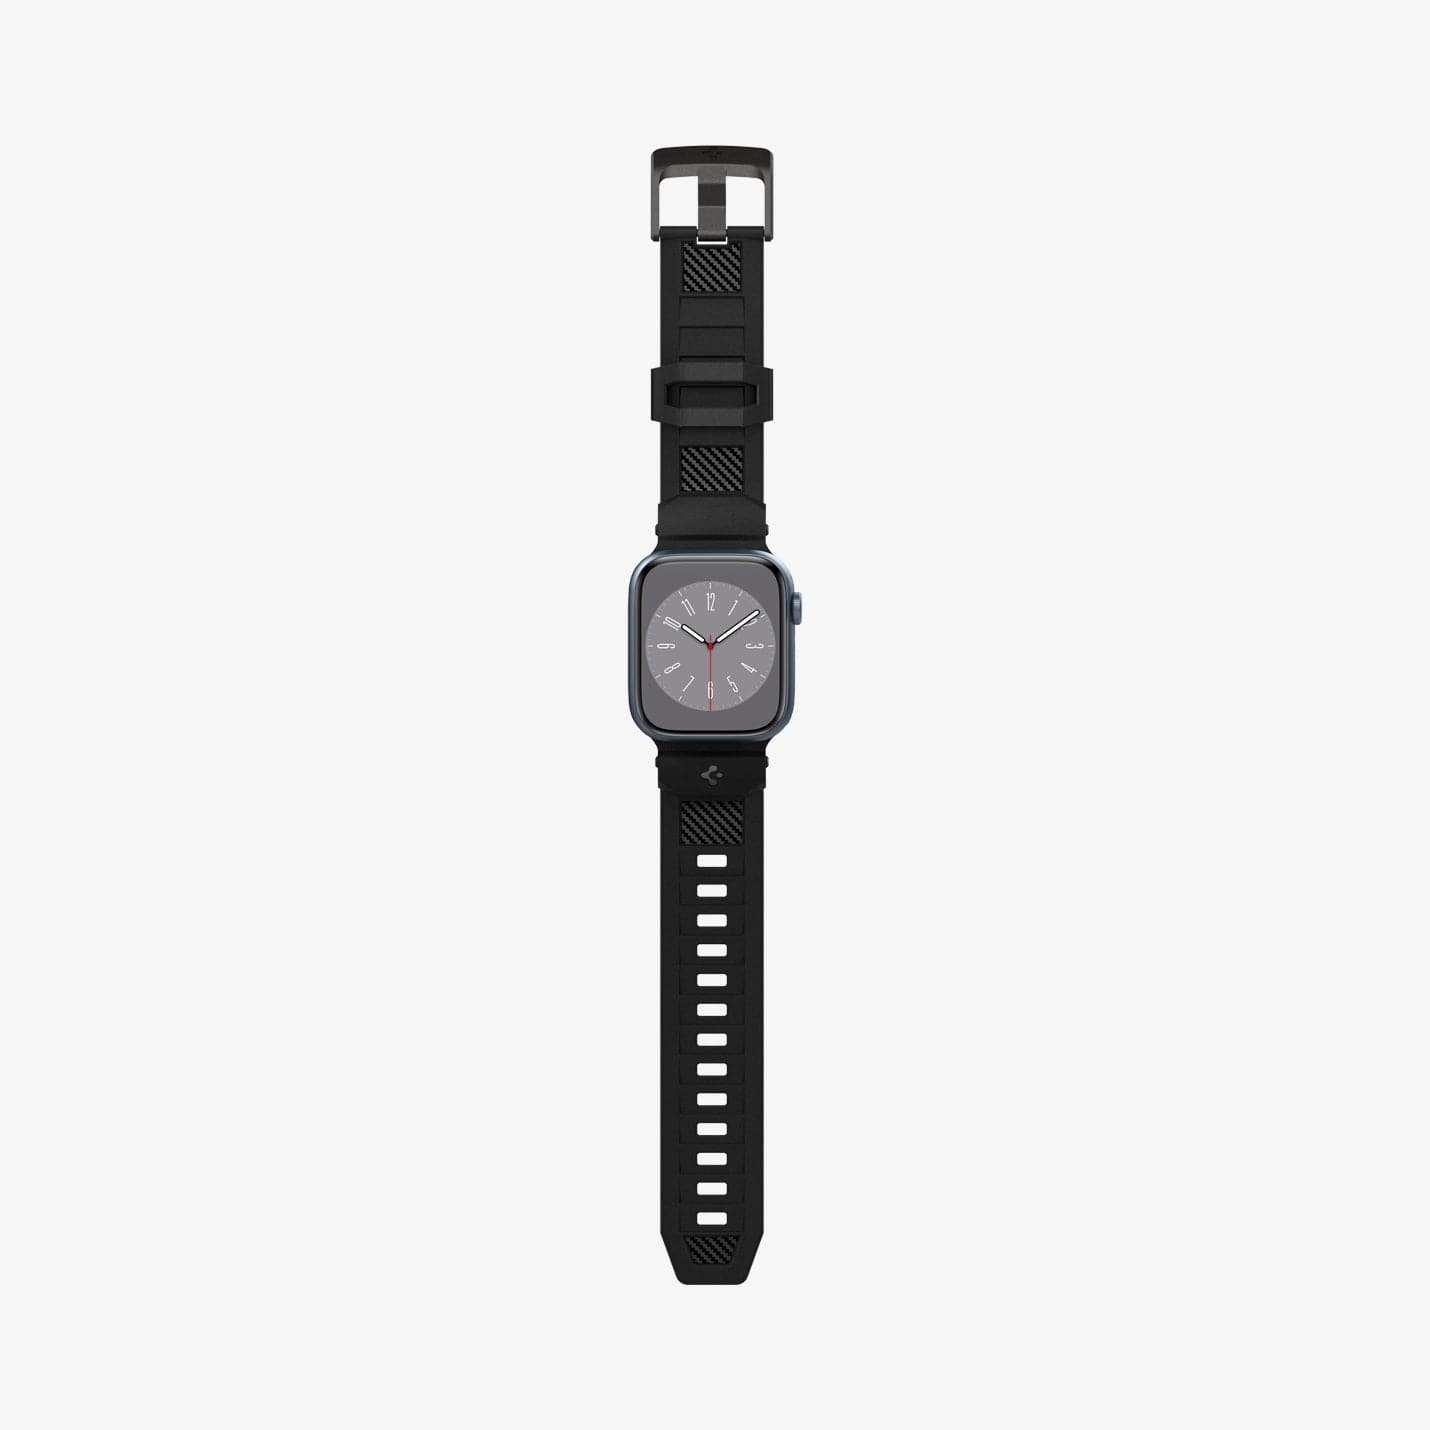 AMP02855 - Apple Watch Series (Apple Watch (41mm)/Apple Watch (38mm)) in matte black showing the front with watch band laid out flat